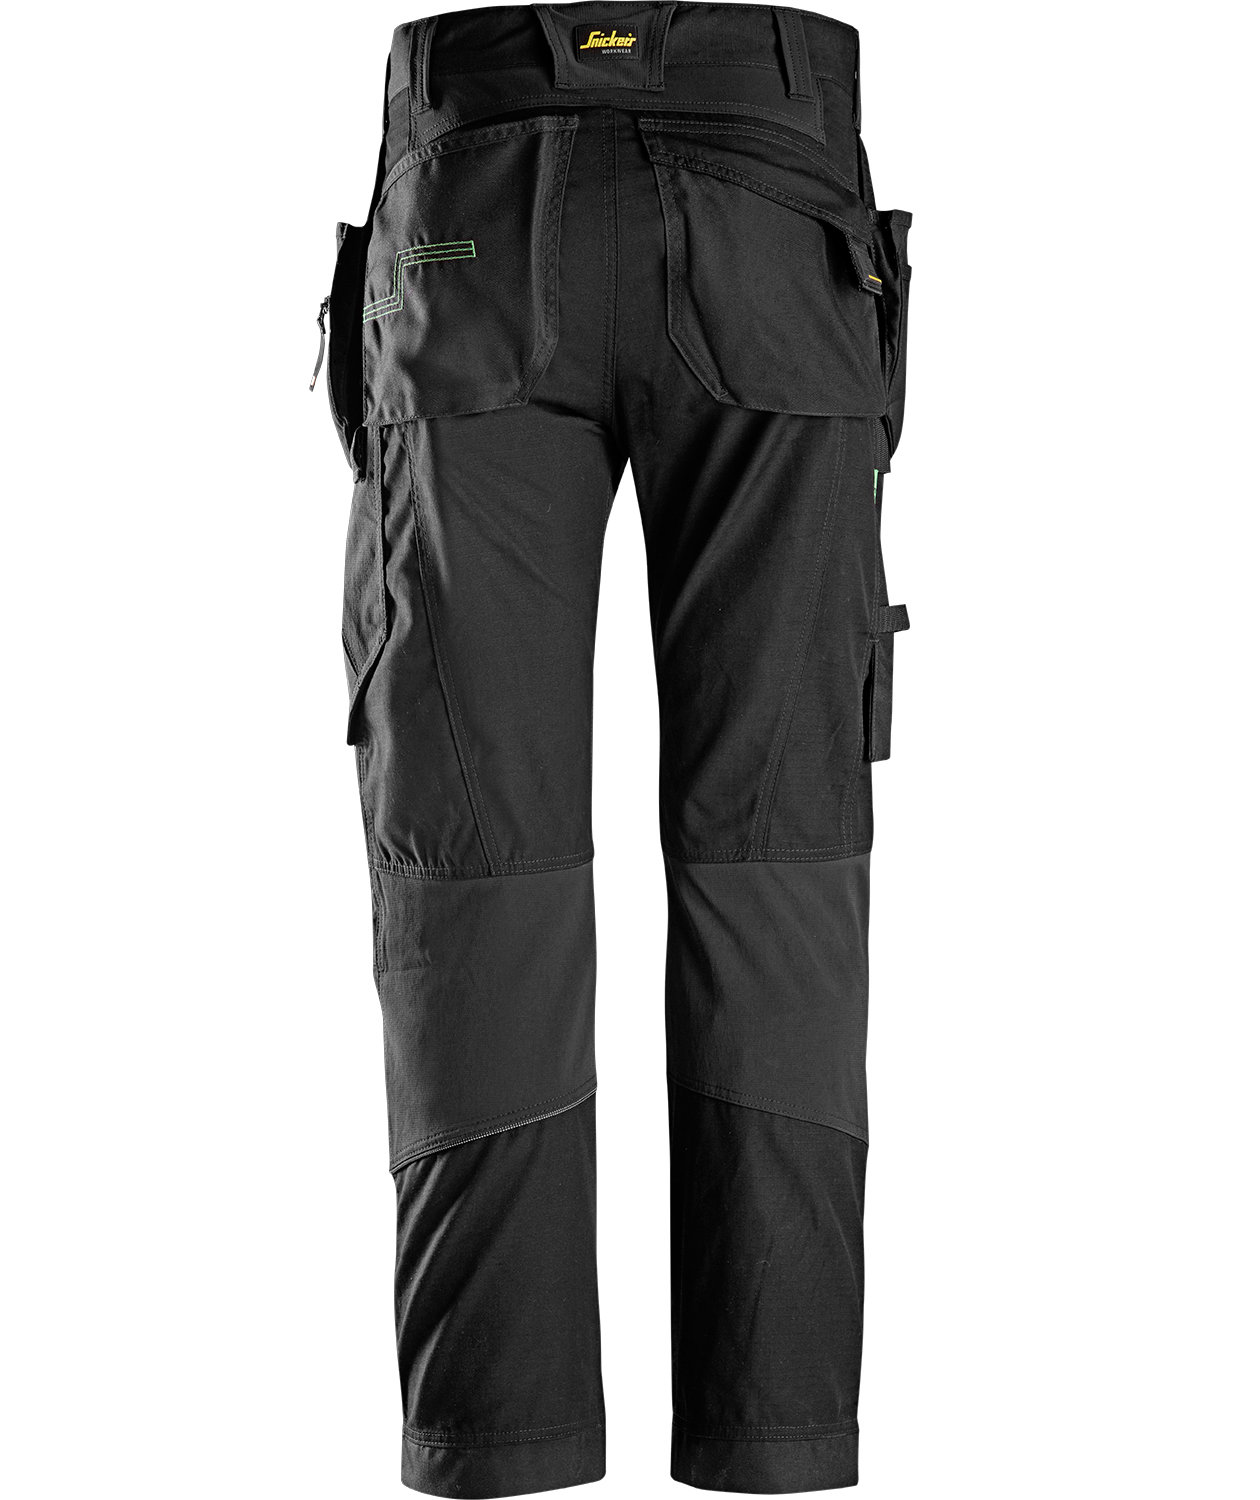 Snickers 6200 Allround Work Trousers Black (30l, 31w) - Anglia Tool Centre